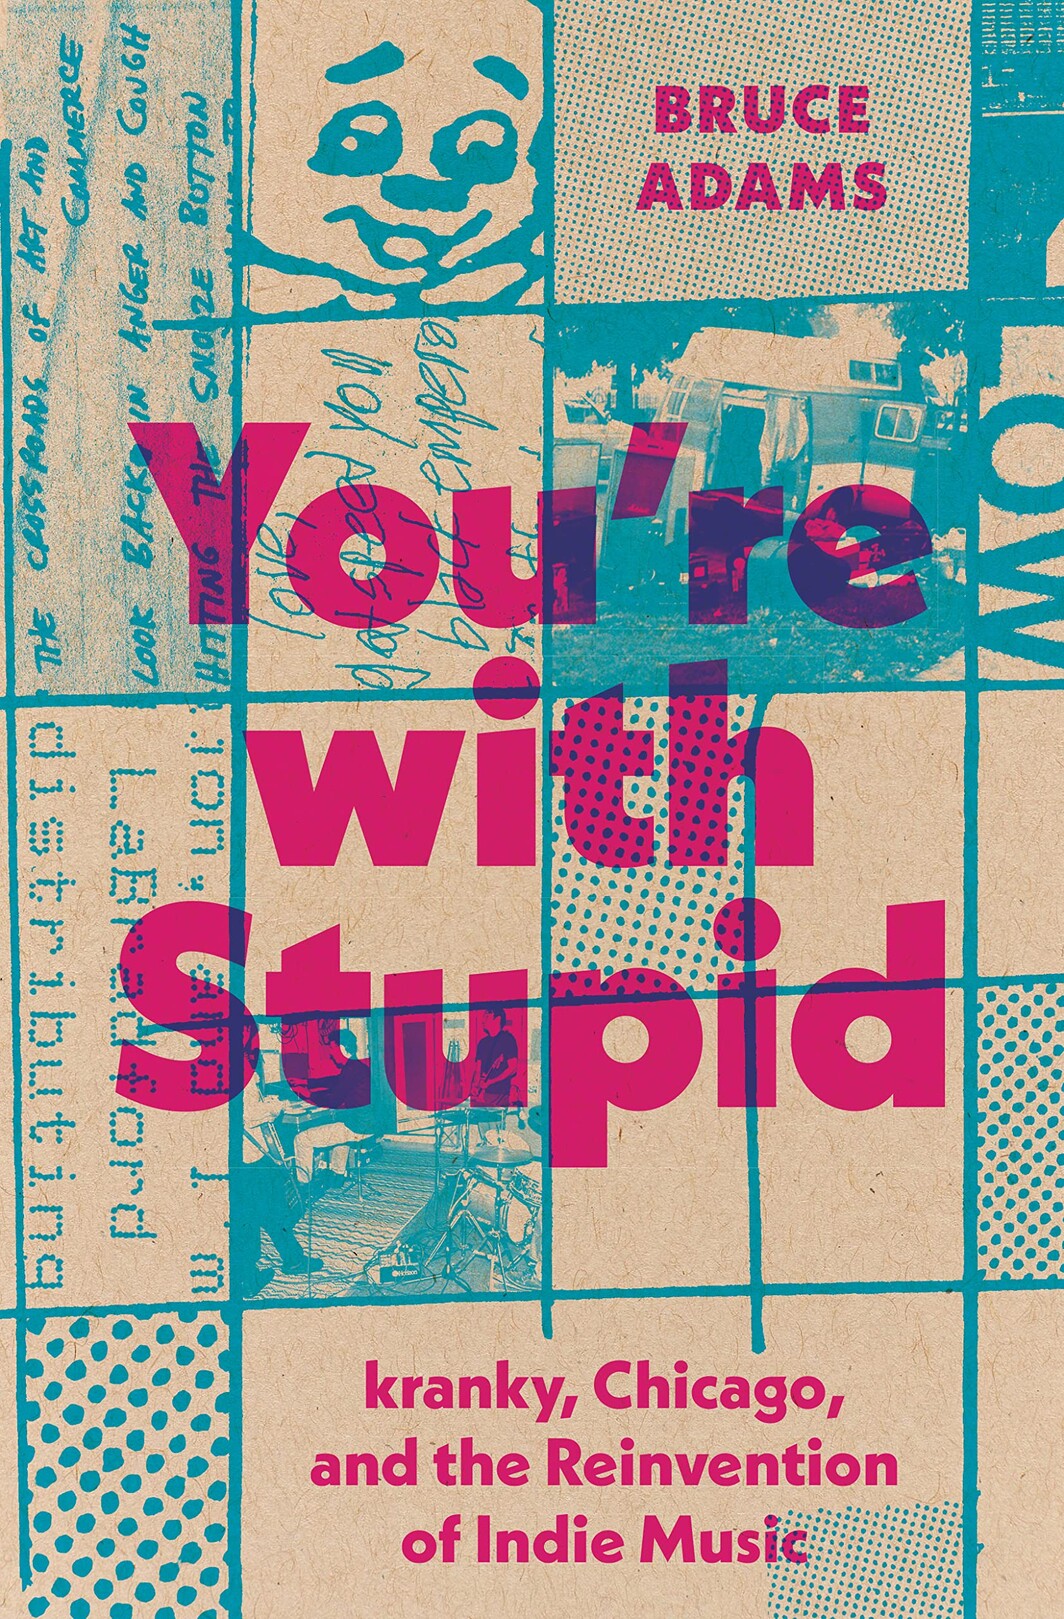 The cover of You're with Stupid: kranky, Chicago, and the Reinvention of Indie Music